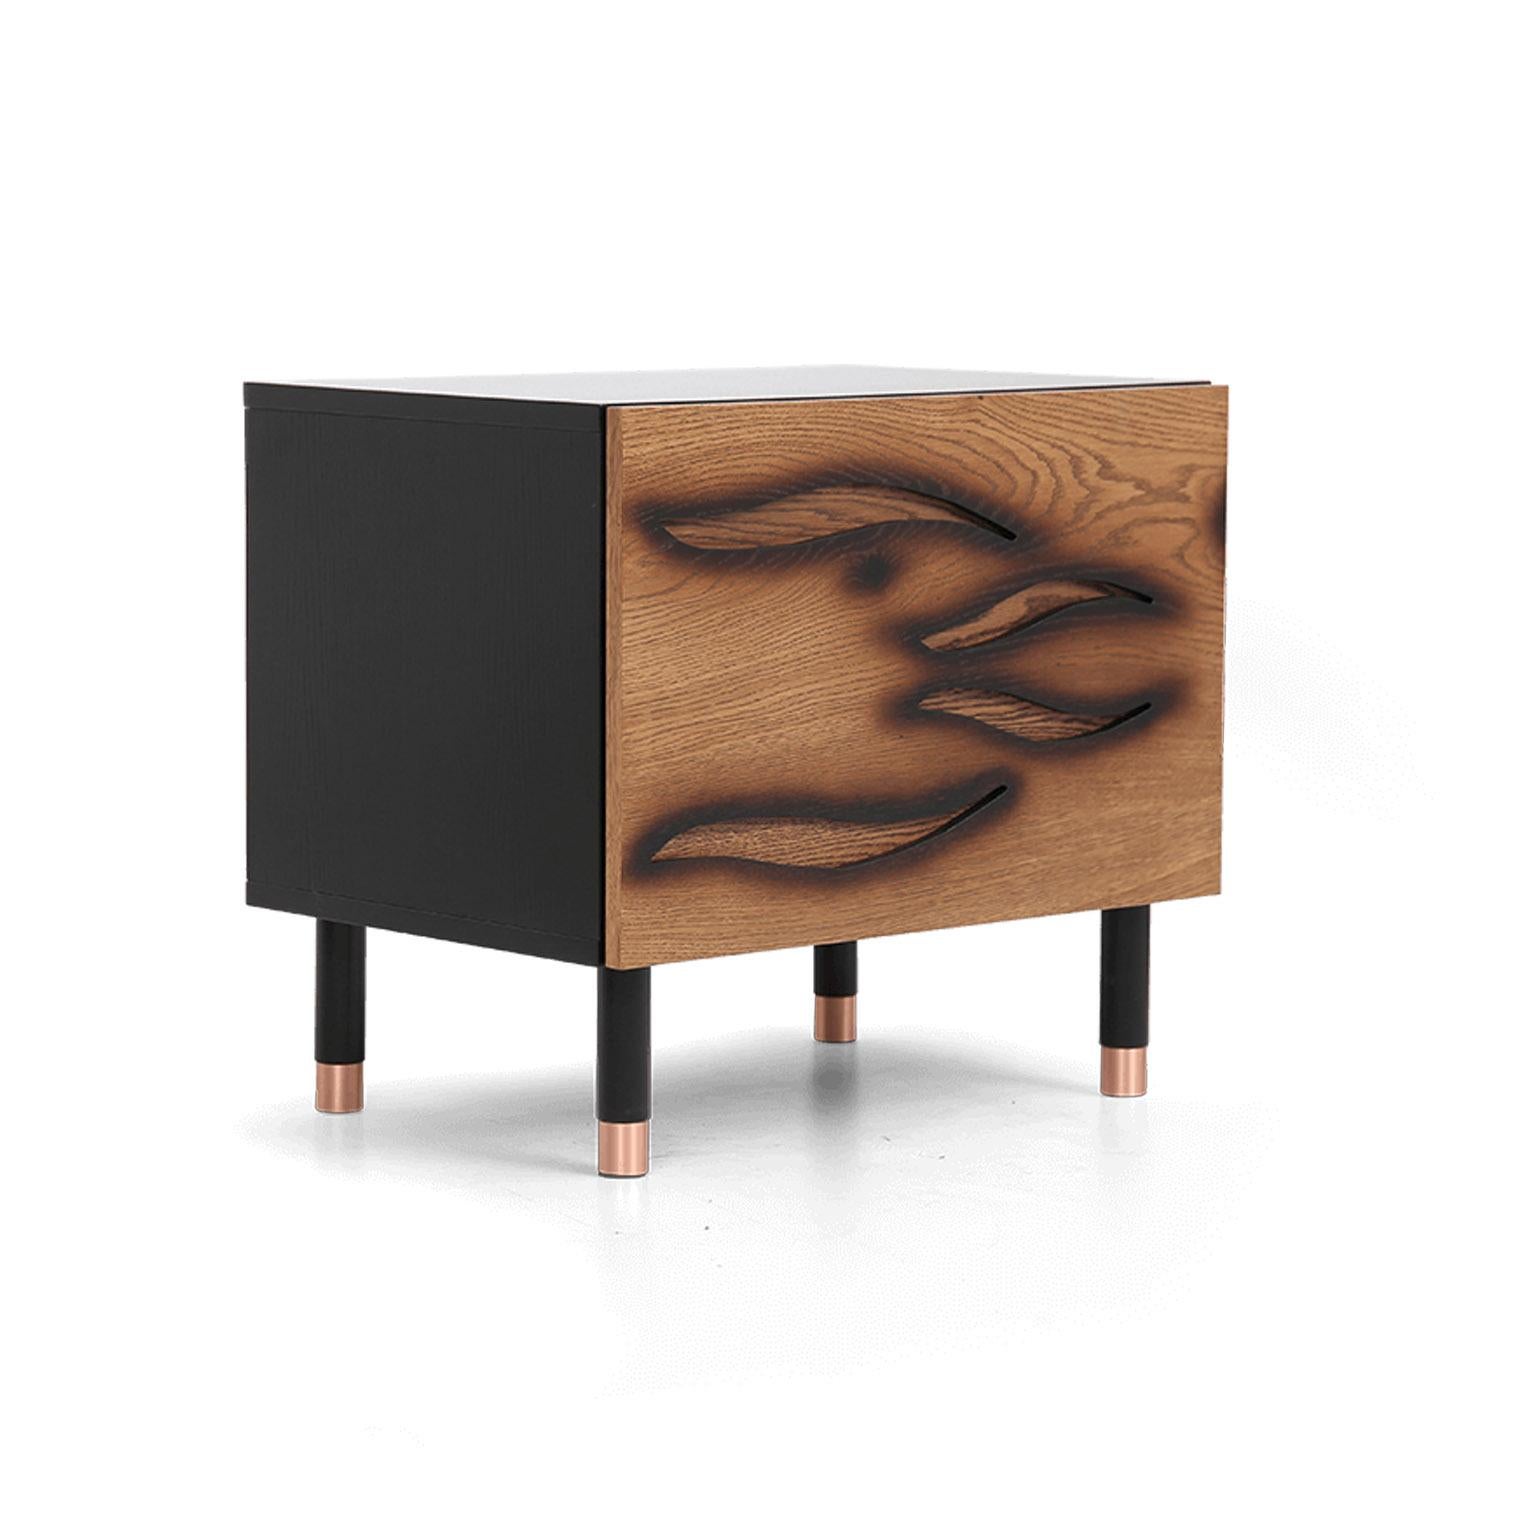 This modern bedside table gently fits the bedroom atmosphere by contrasting black and brown. Each bedside table features one drawers and inside shelf with soft closing mechanism to enhance the fabulous minimal look and feel. It is made of solid wood